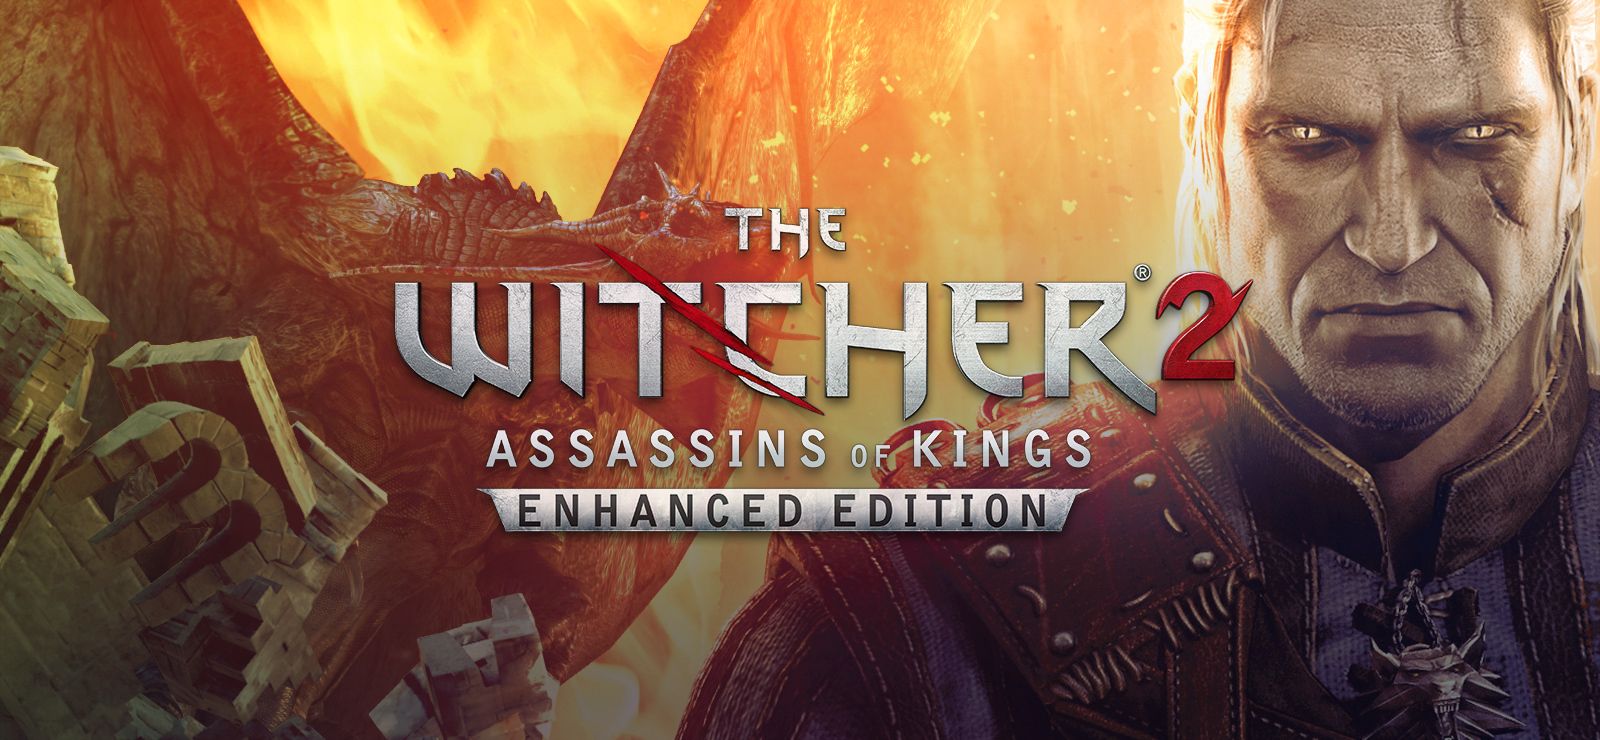 Free download The Witcher 2 Assassins Of Kings HD Wallpaper 22 1600 X 740 [1600x740] for your Desktop, Mobile & Tablet. Explore Witcher2 Wallpaper. Witcher2 Wallpaper